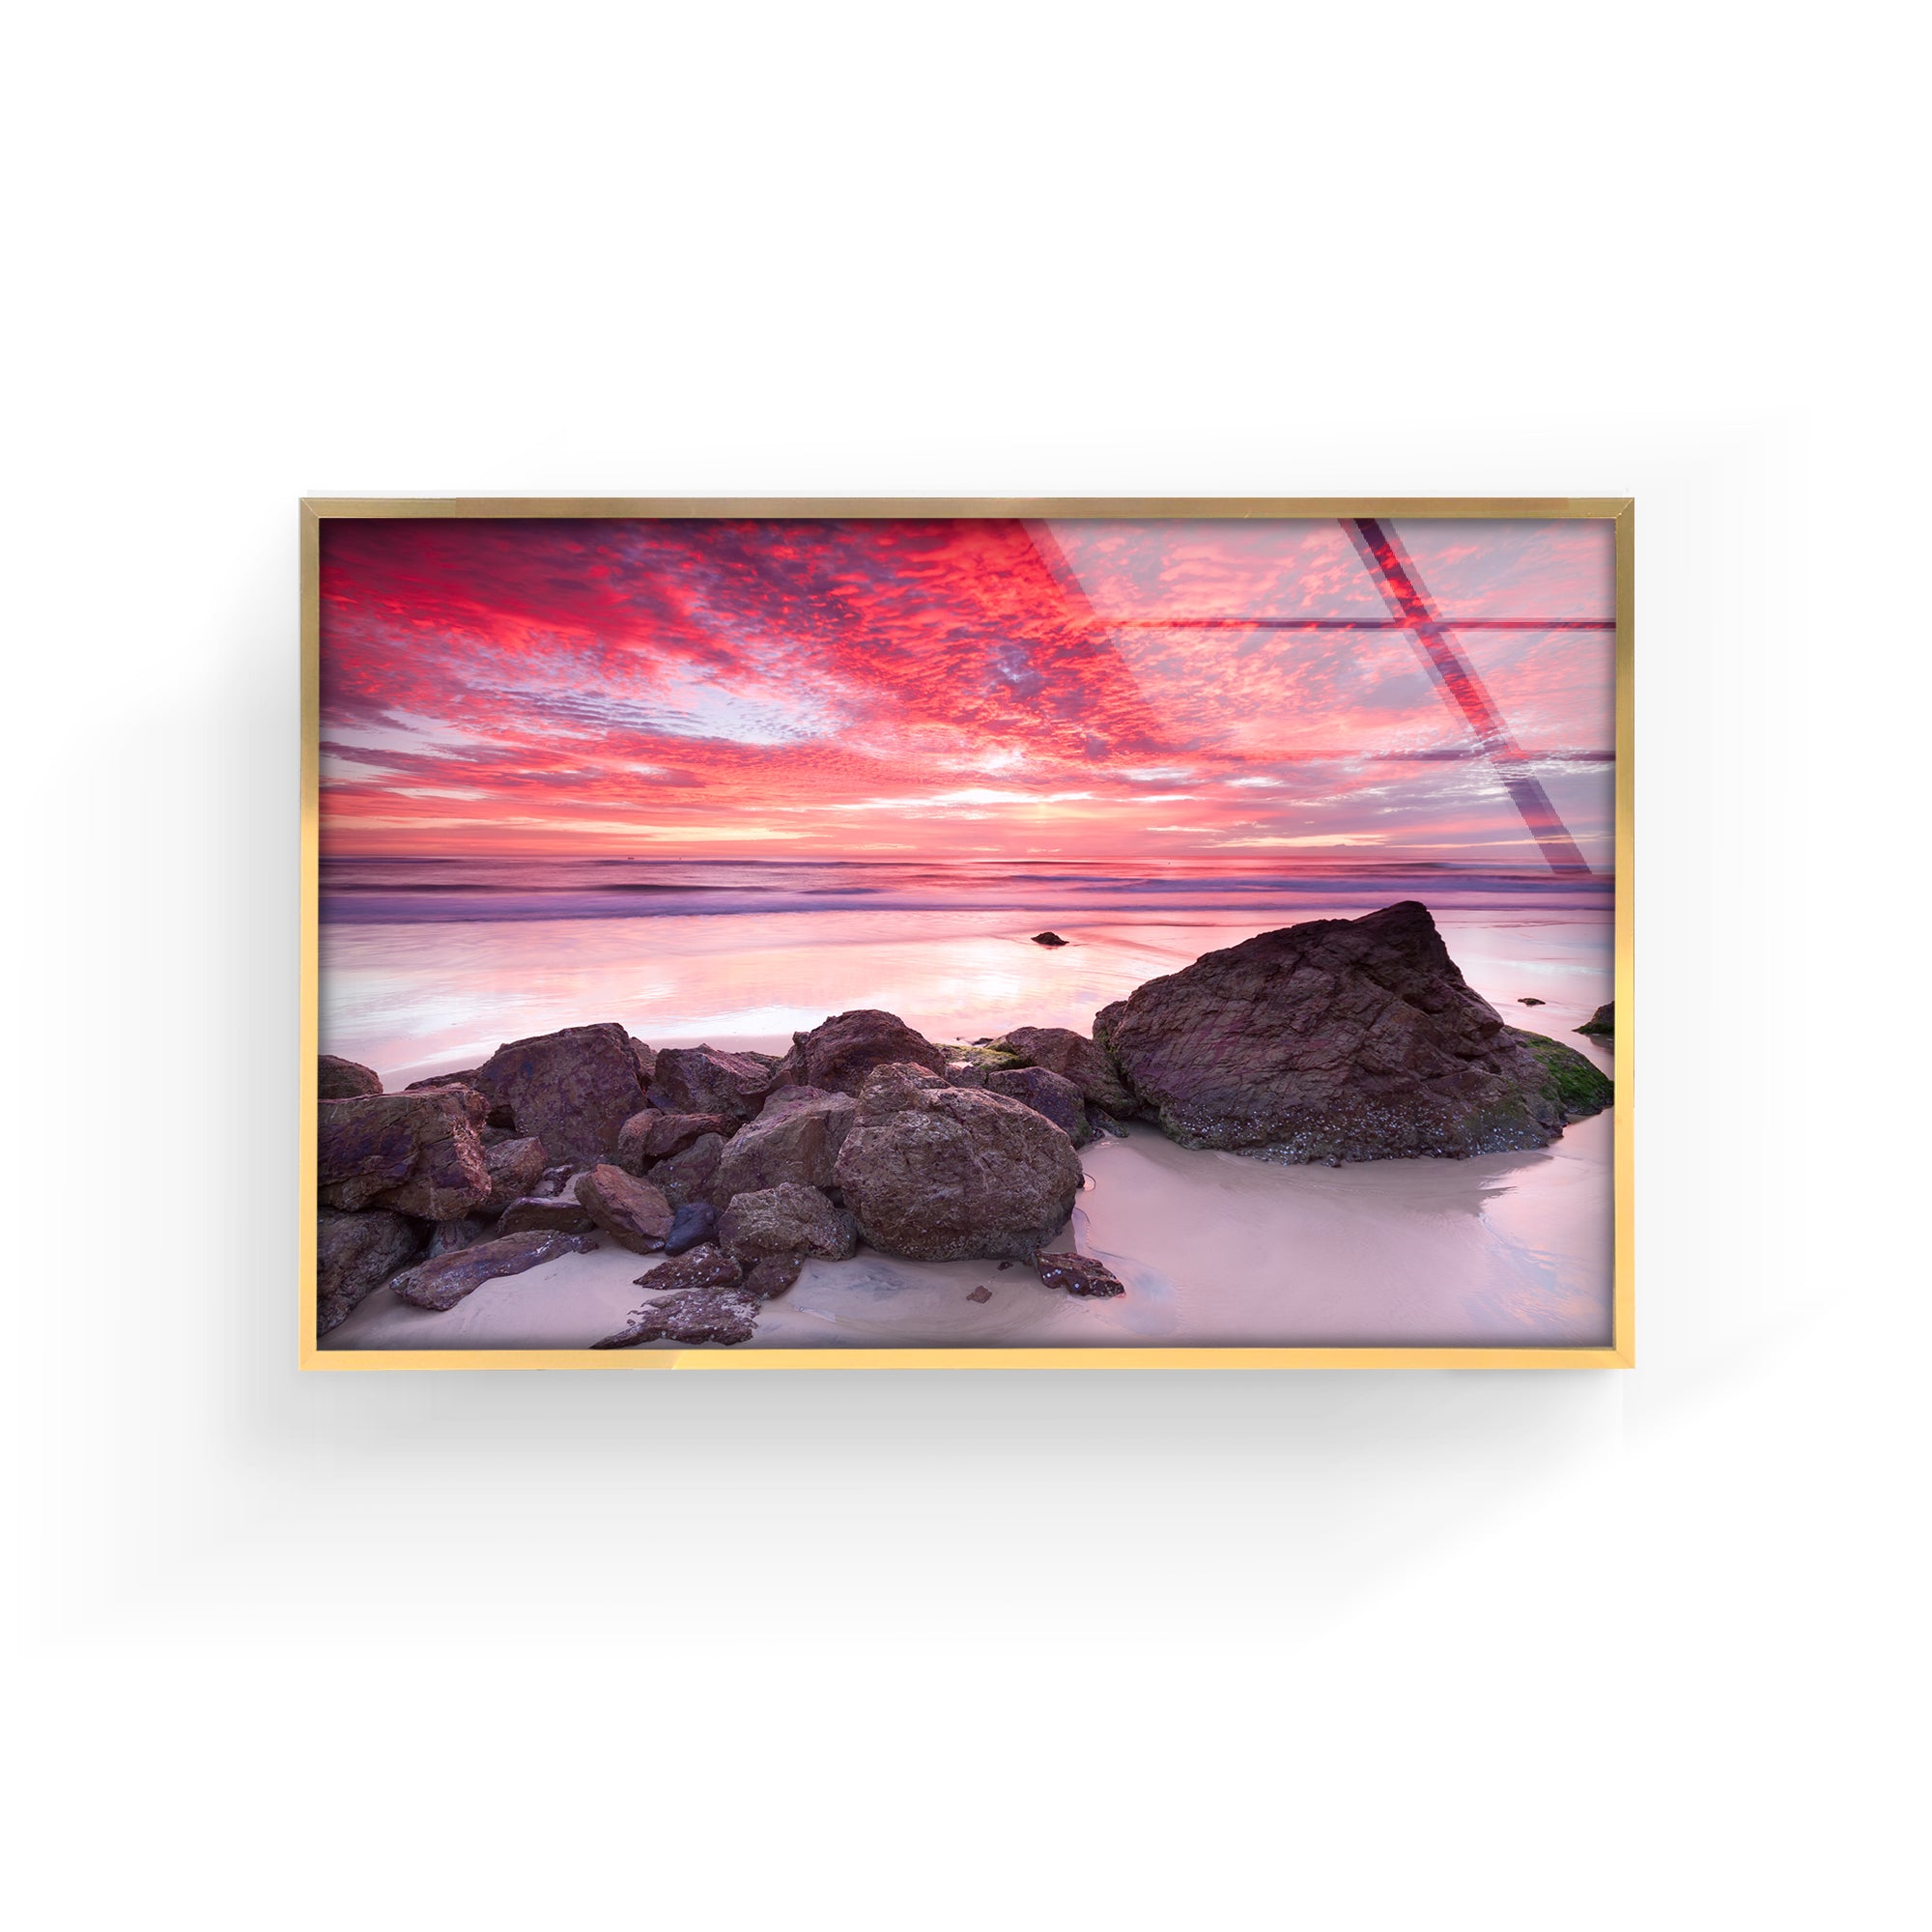 a picture hanging on a wall of a beach